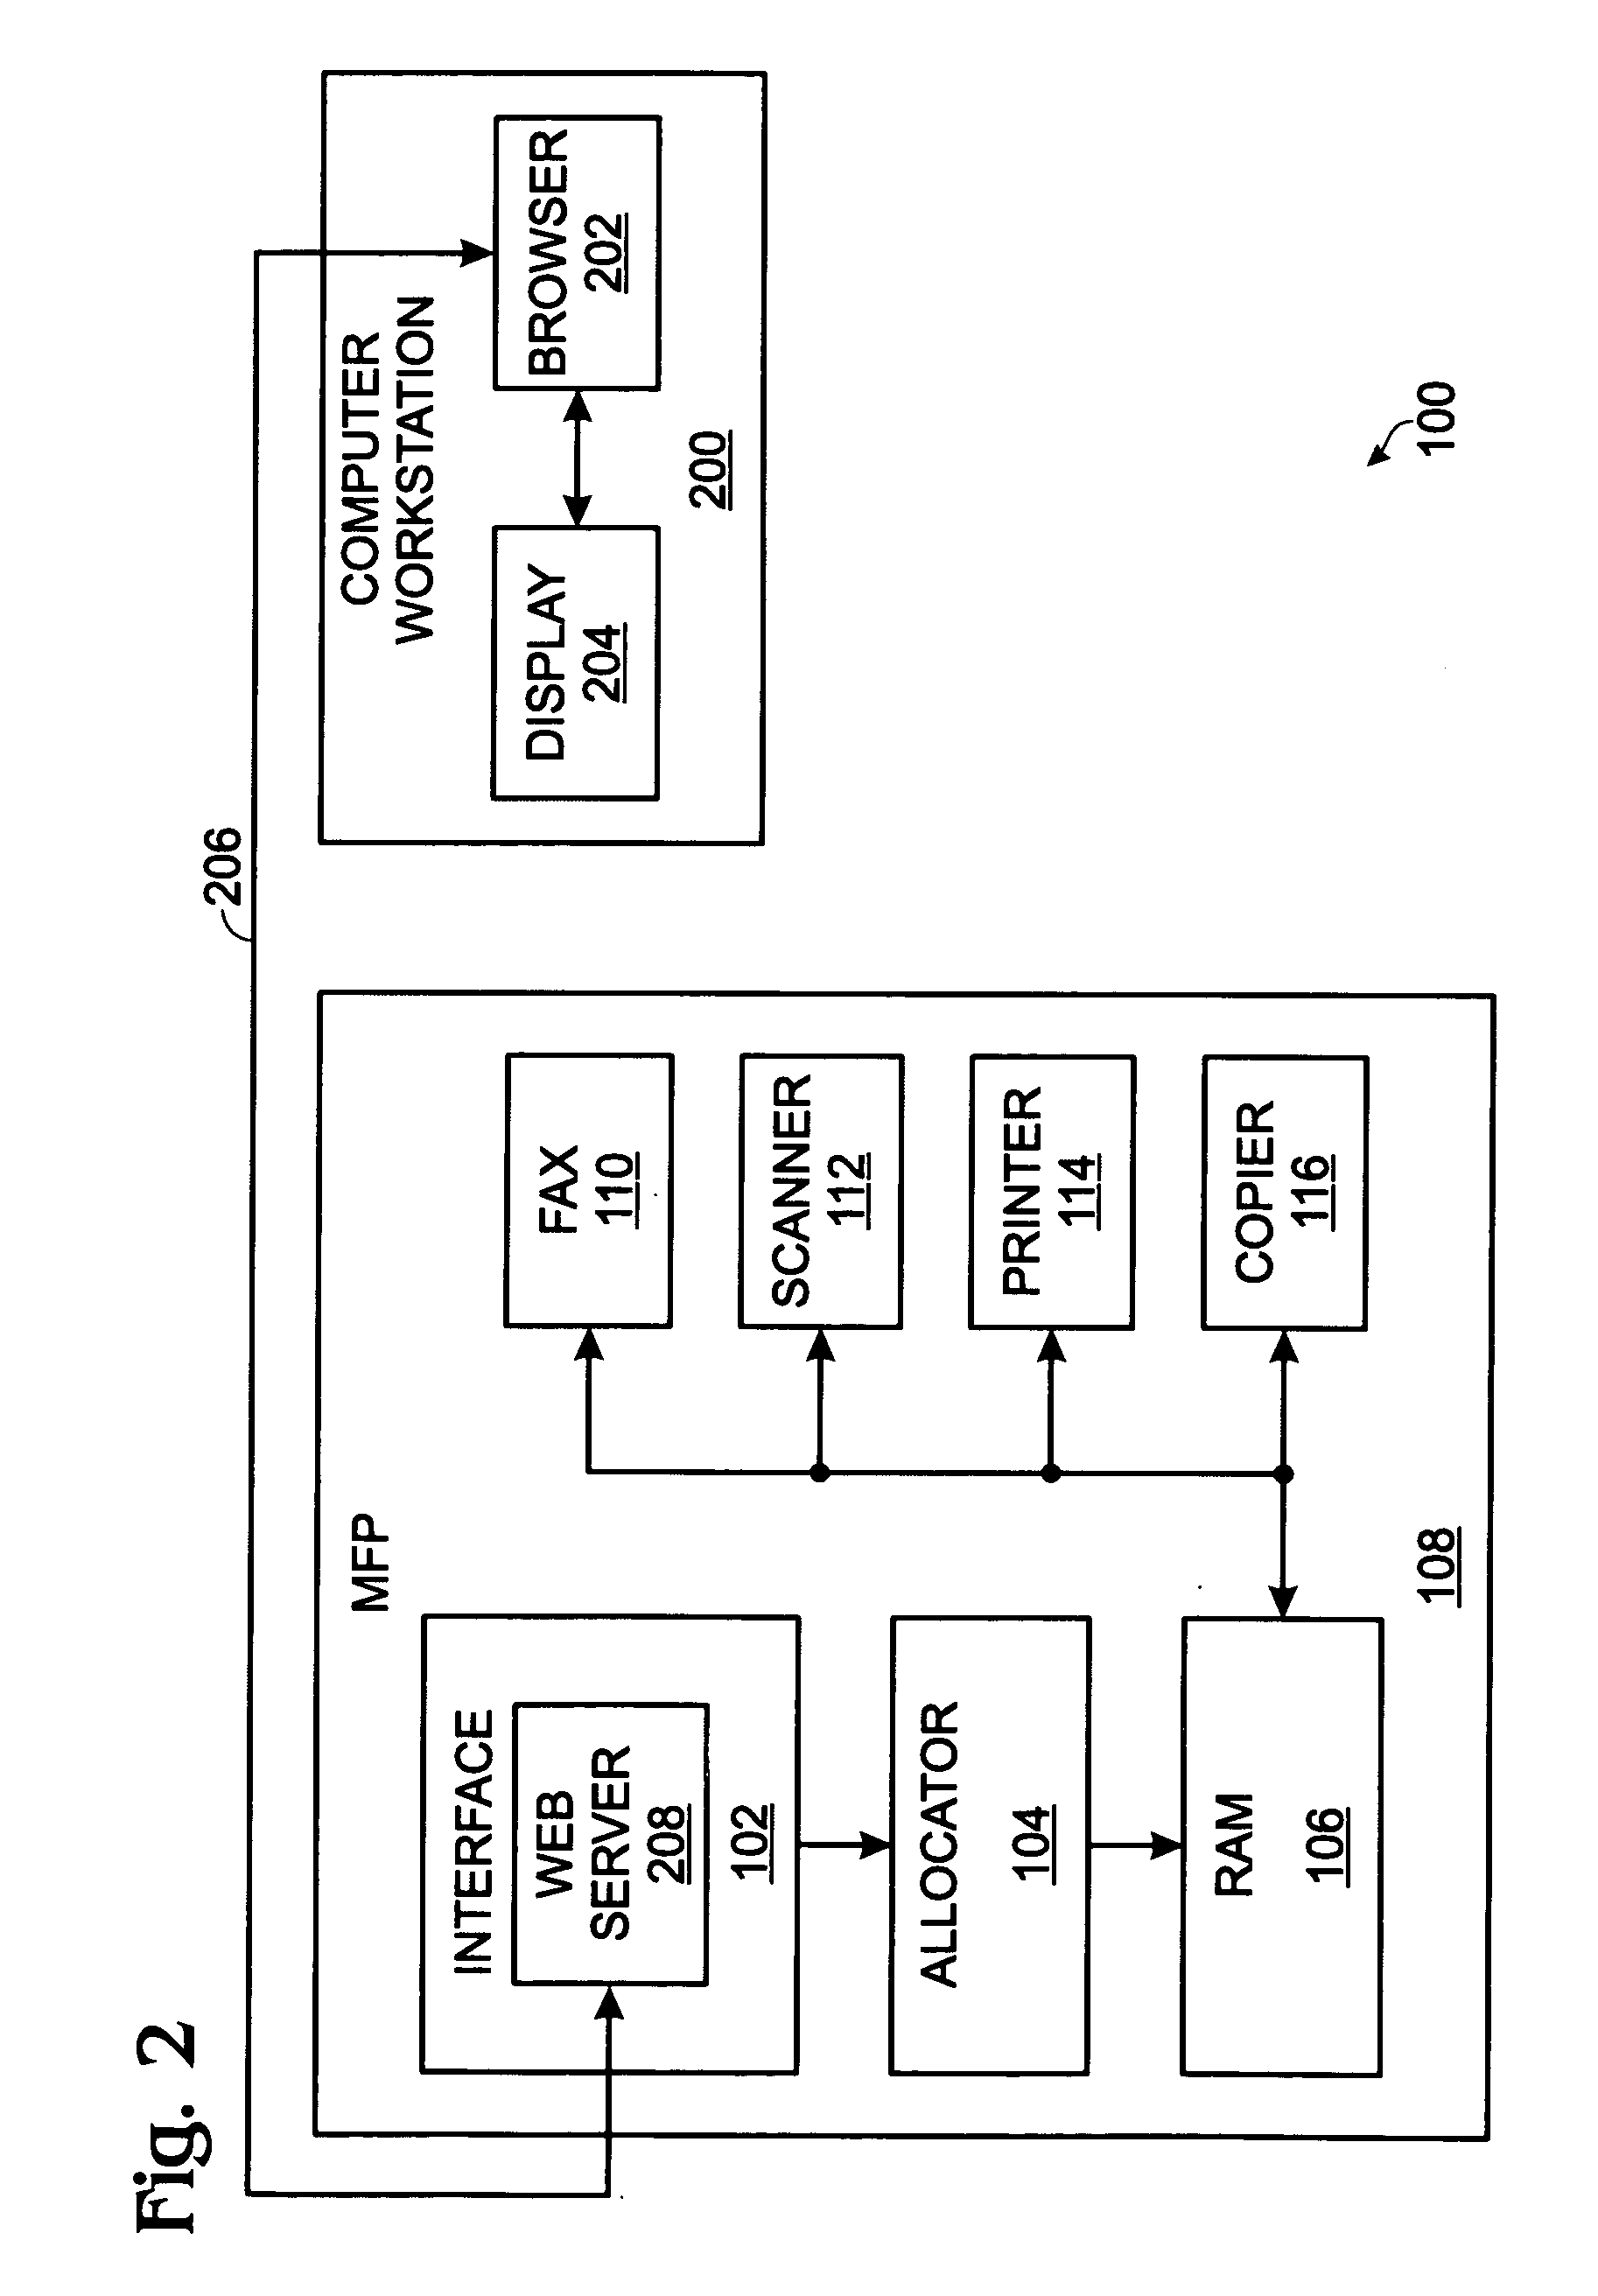 System and method for allocating random access memory in a multifunction peripheral device